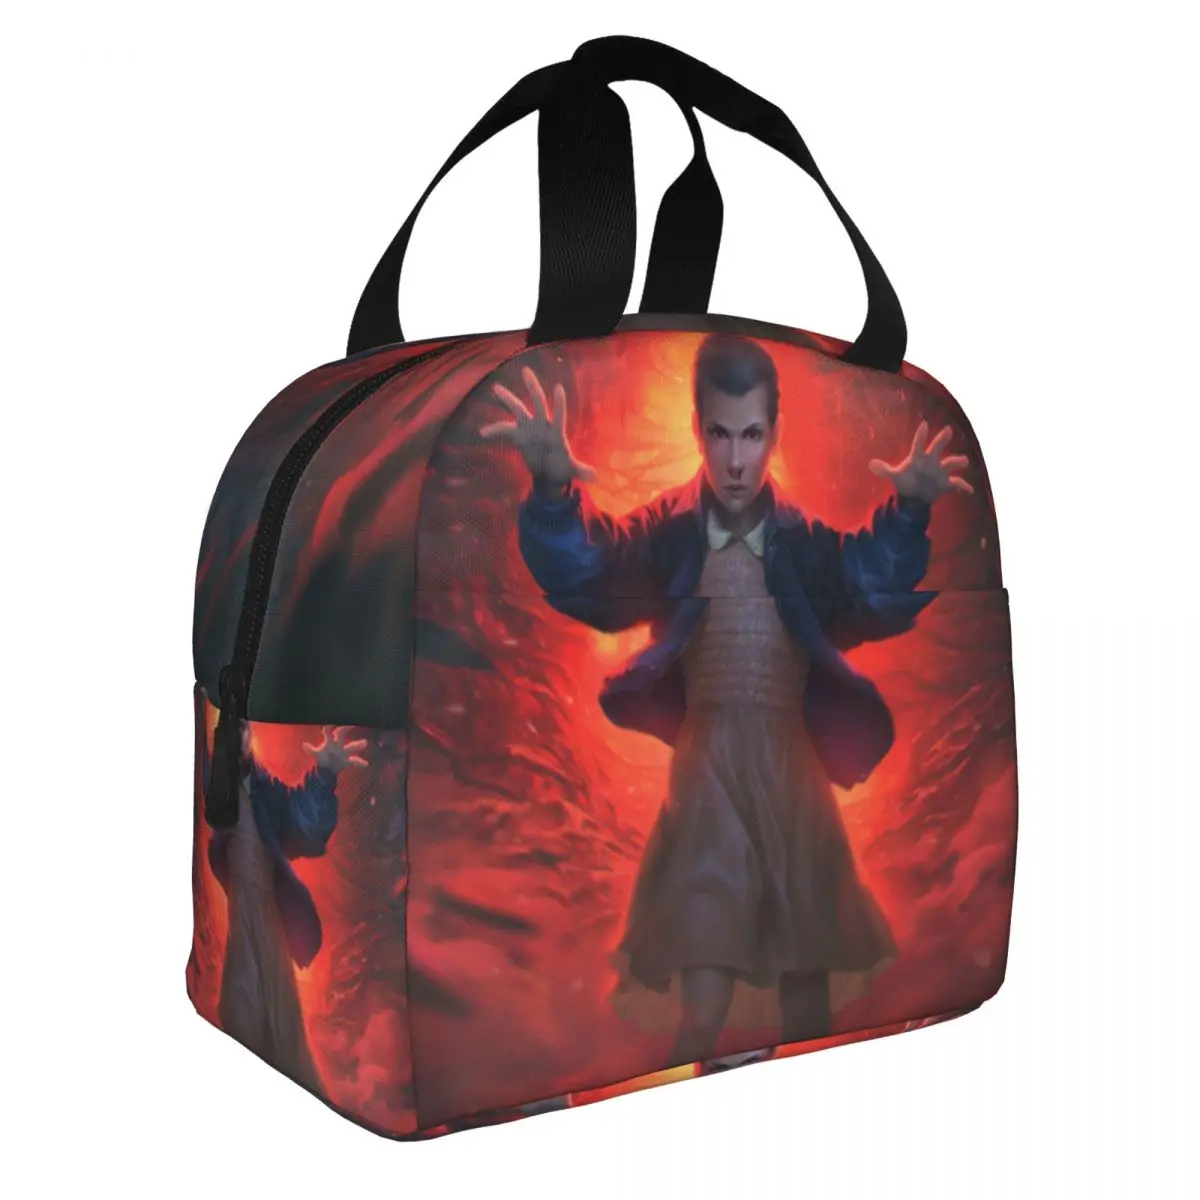 Eleven Scylla Smite X Stranger Things Lunch Bento Bag Portable Aluminum Foil thickened Thermal Cloth Lunch Bag for Women Men Boy